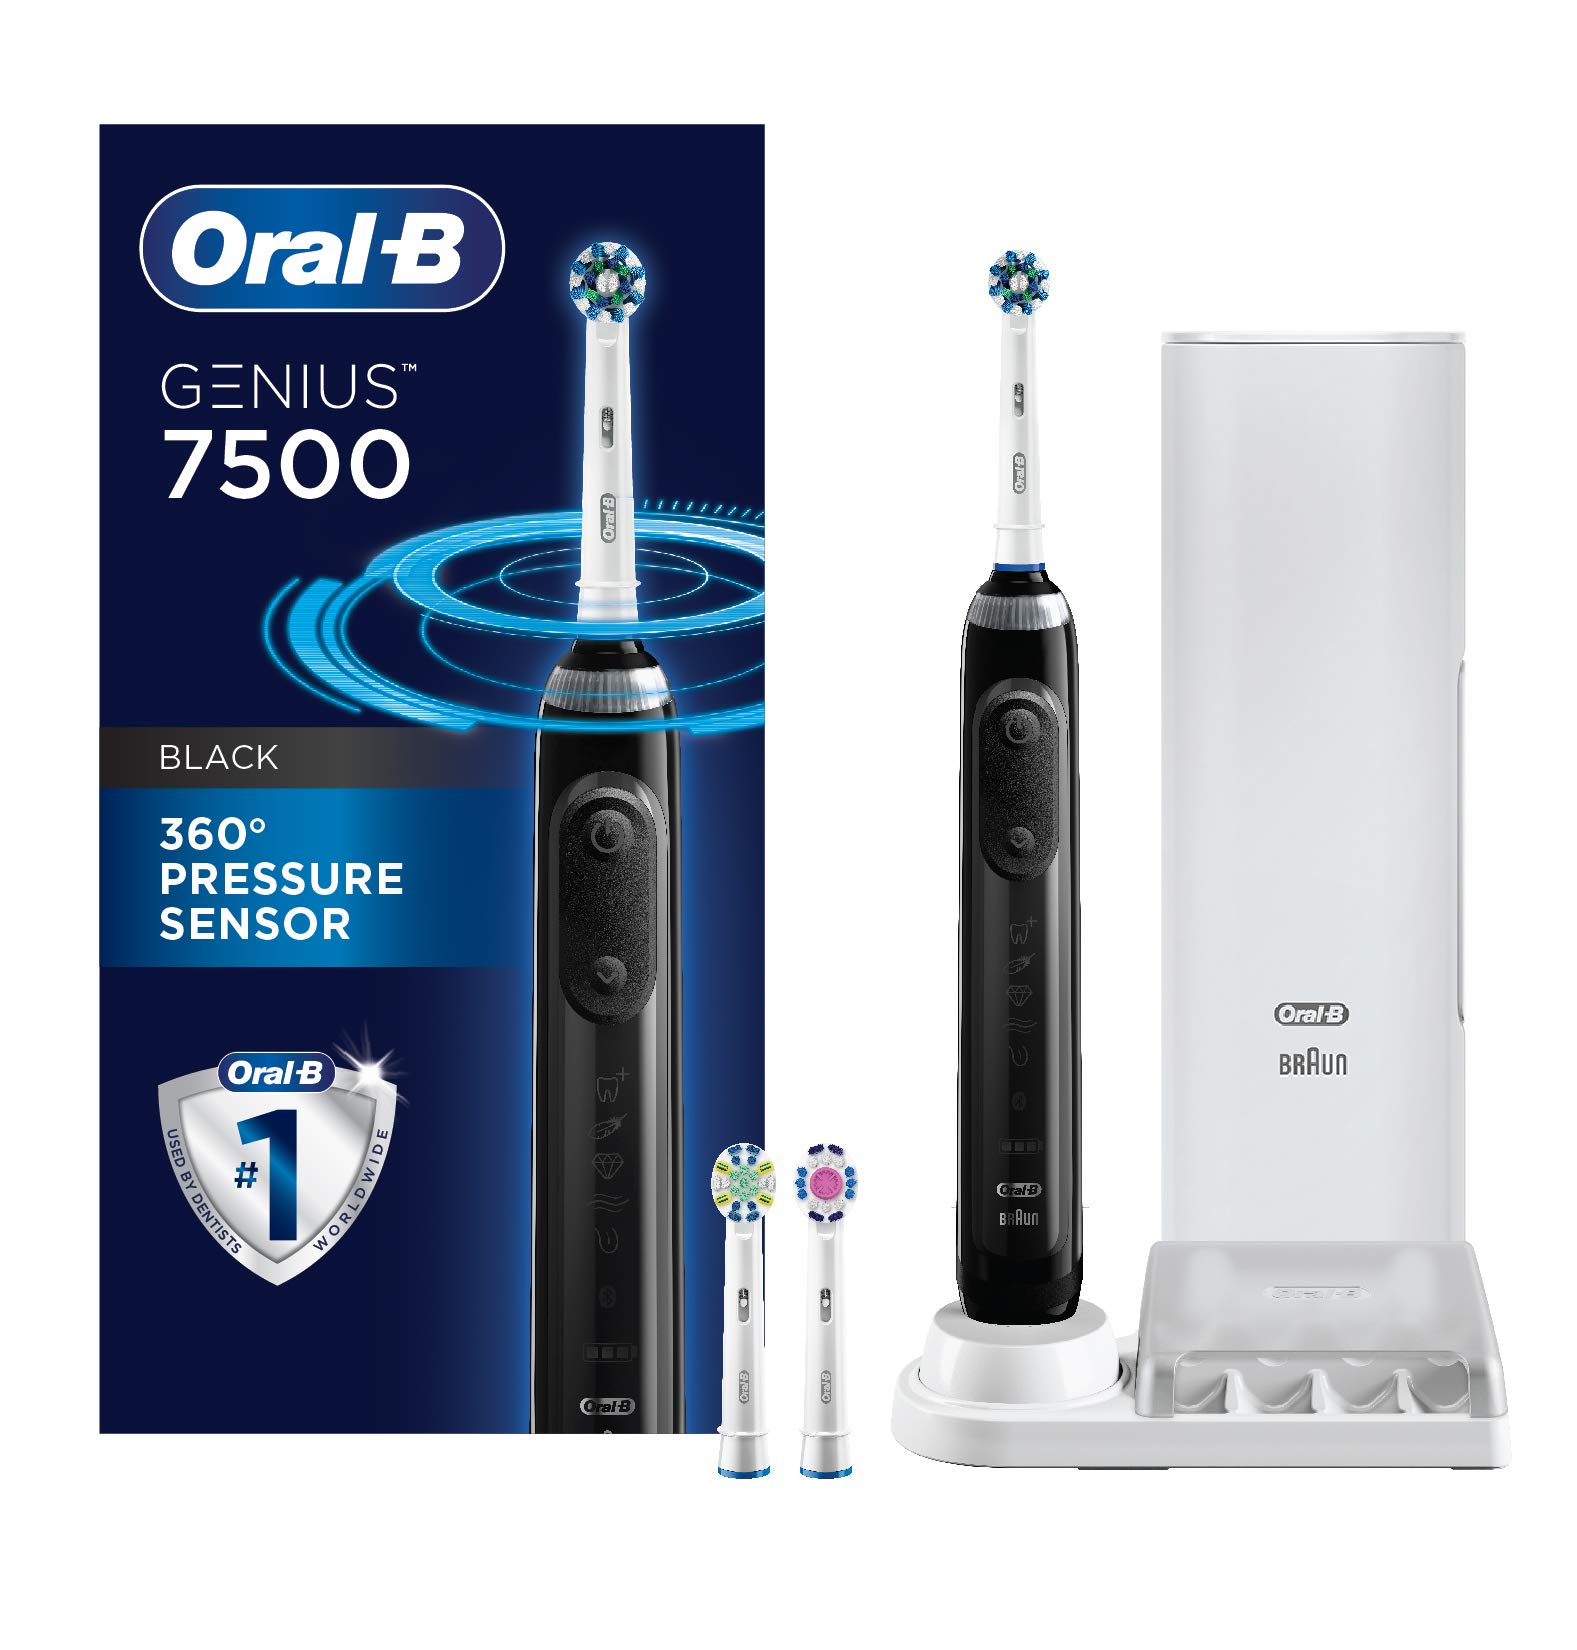 YMMV - Amazon Fresh Deal - Oral-B 7500 Electric Toothbrush, Black with 3 Brush Heads and Travel Case - 5 Cleaning Modes - 2 Minute Timer - $34